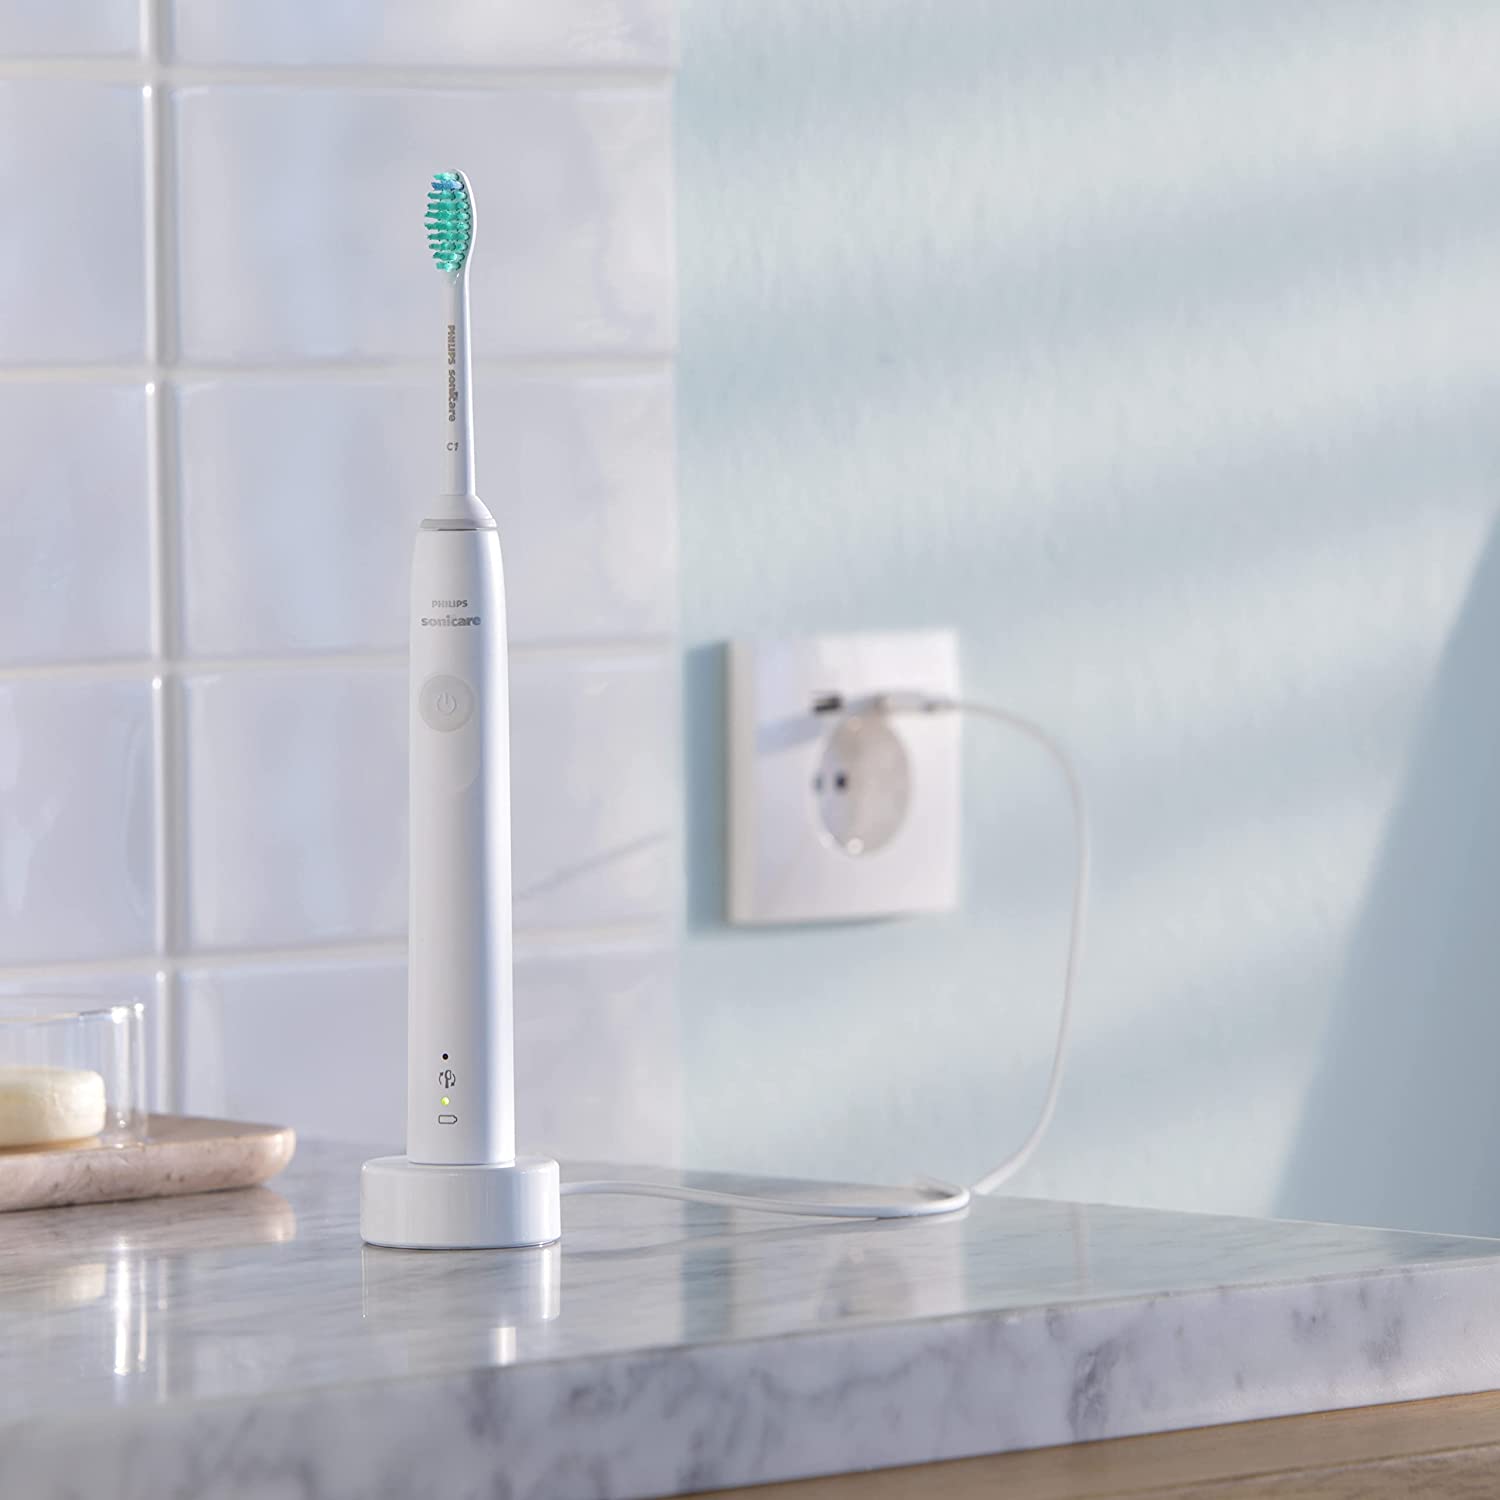 PHILIPS HX3671/13 SONICARE 3100 TOOTHBRUSH ELECTRIC WHITE